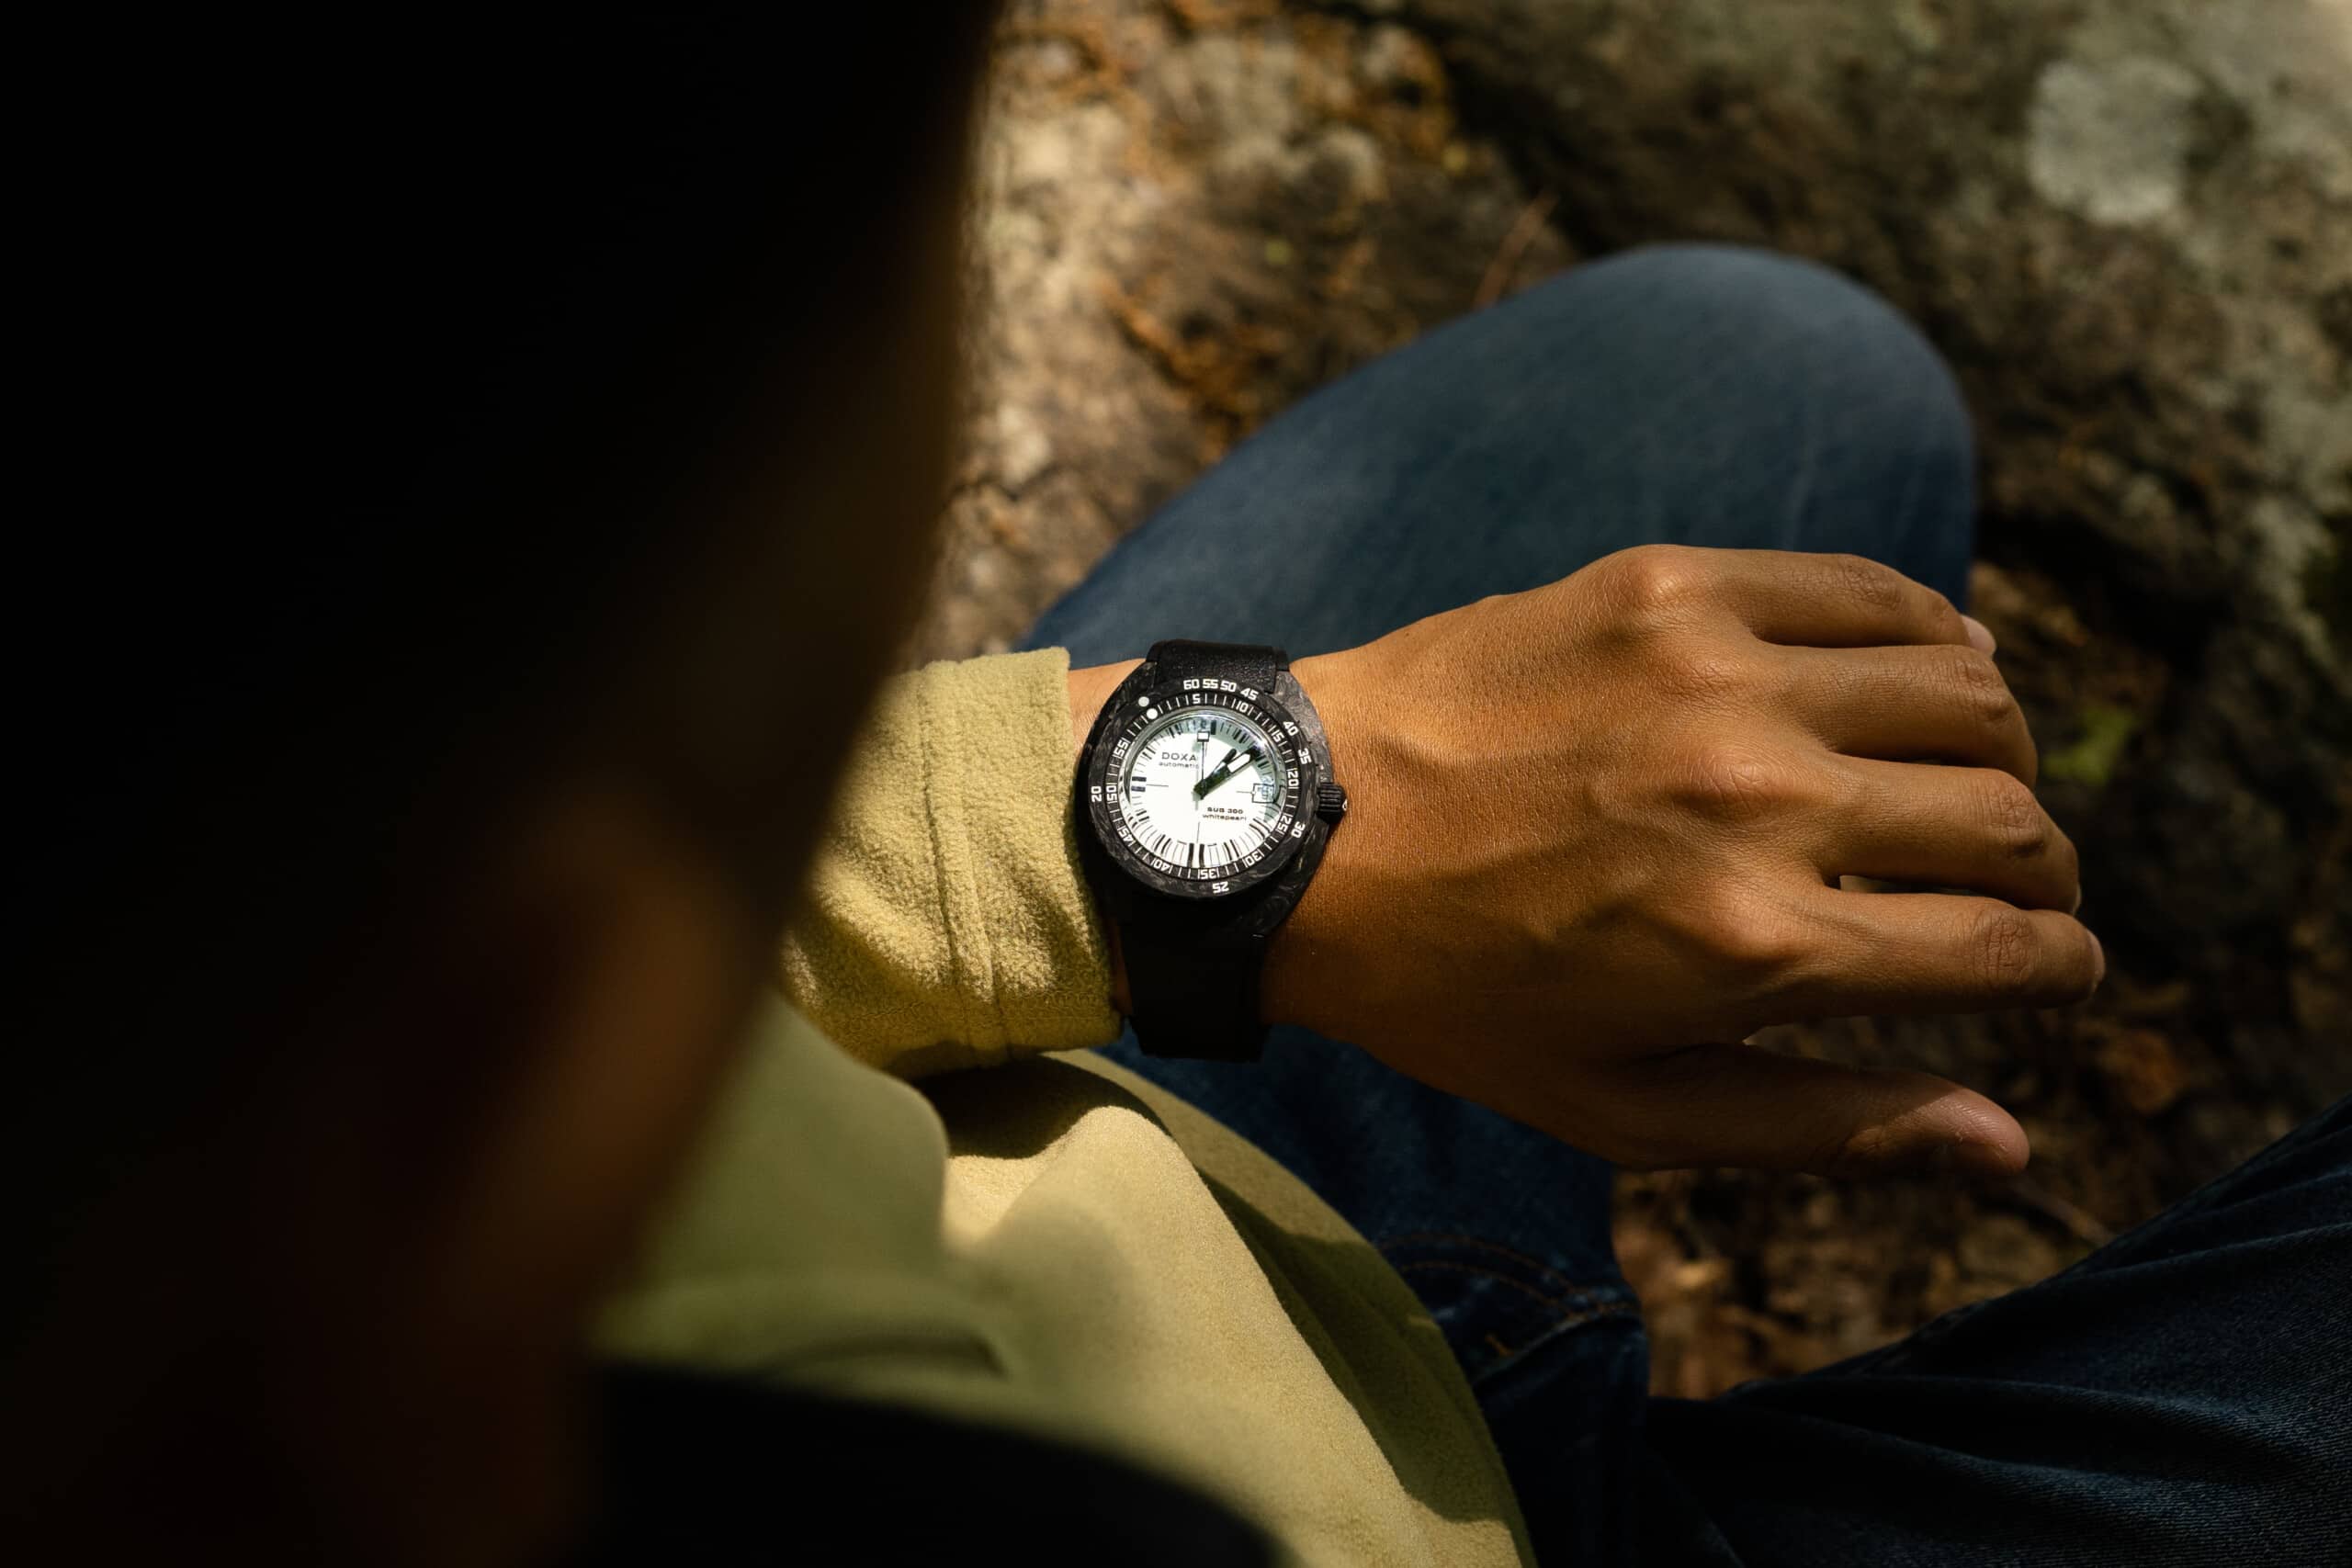 Out Of Office: The Doxa Carbon Whitepearl is the Perfect Watch for